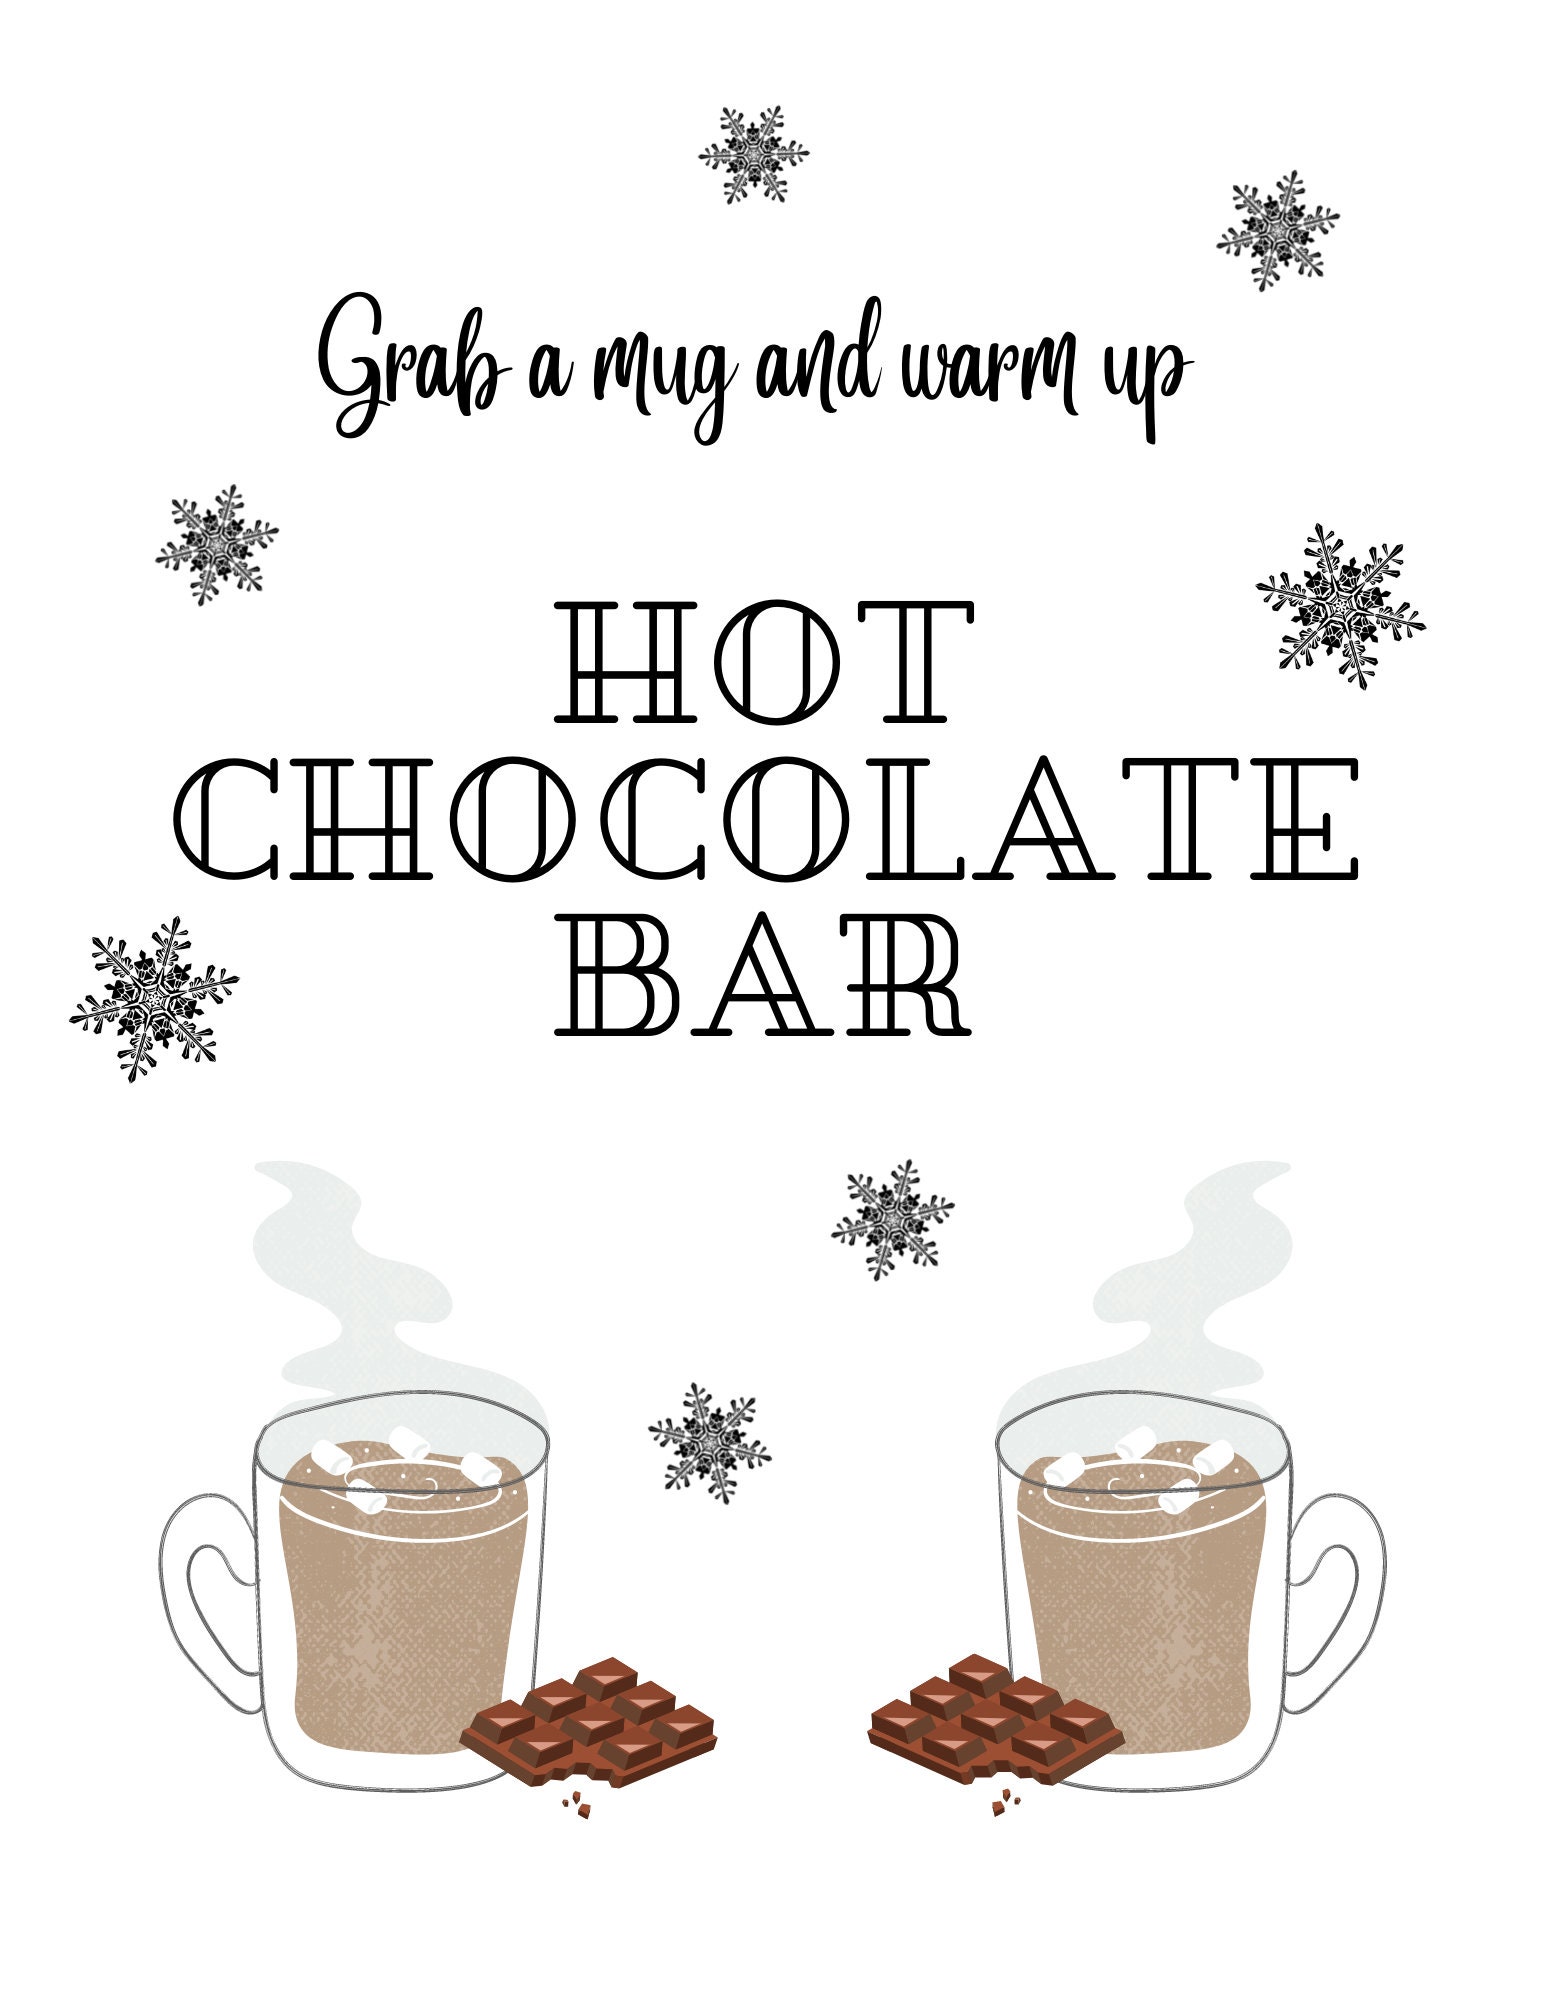 MUCHNEE Personalized Hot Cocoa Bar Printed Metal Sign, Custom Name Hot  Chocolate Bar Sign, Retro Rustic Hot Cocoa Cup Sign, Cocoa Bar Decor For  Pub